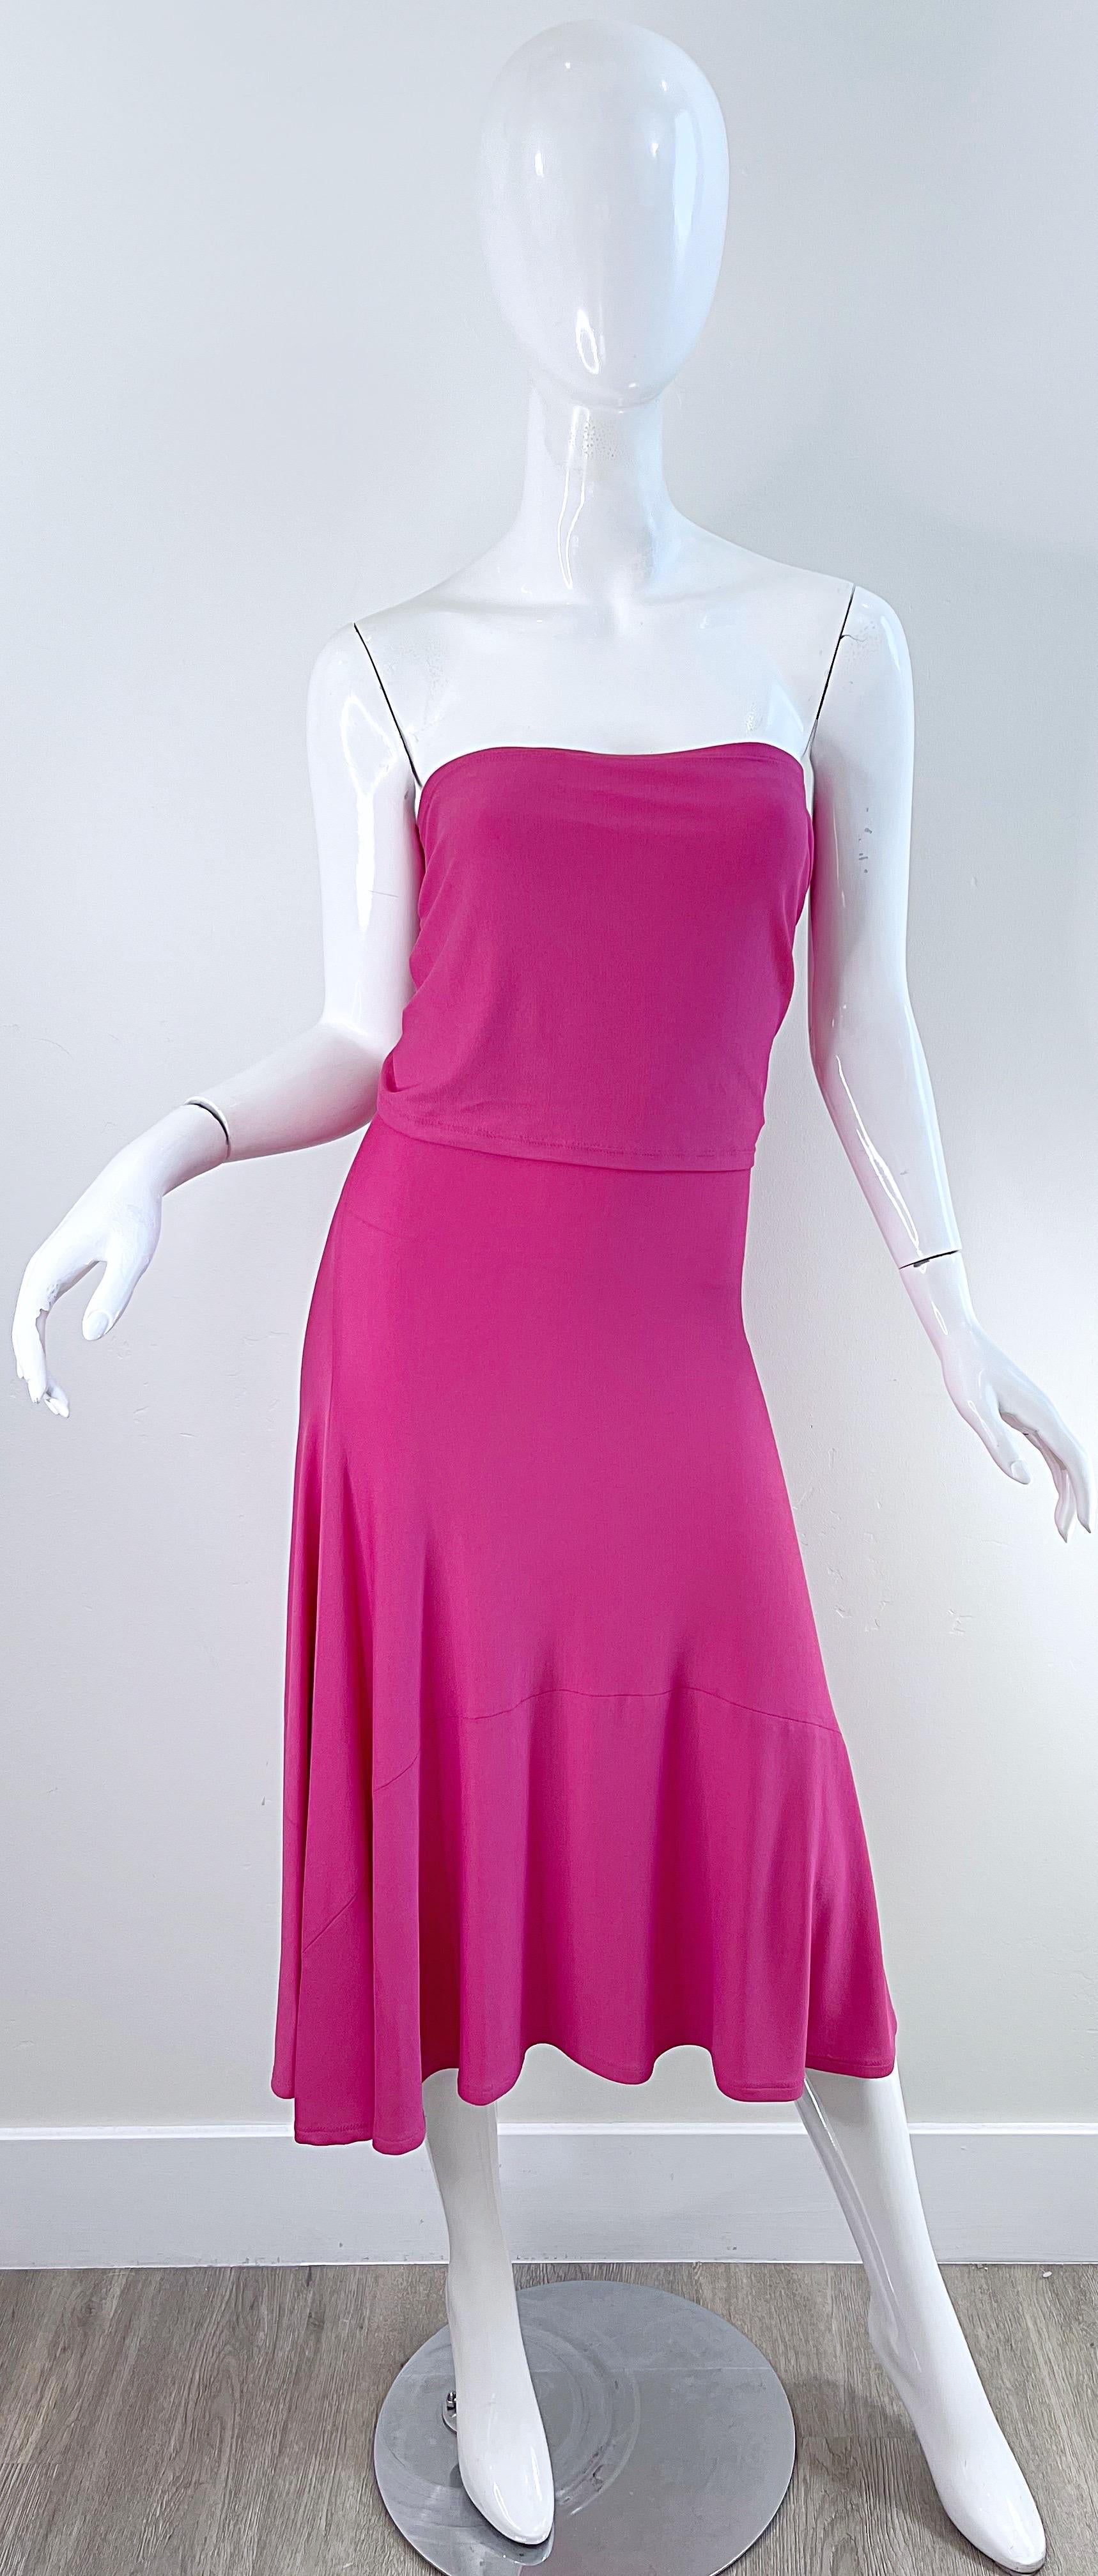 NWT Donna Karan Resort 2016 Hot Pink Size Medium Strapless Tube Dress In New Condition For Sale In San Diego, CA